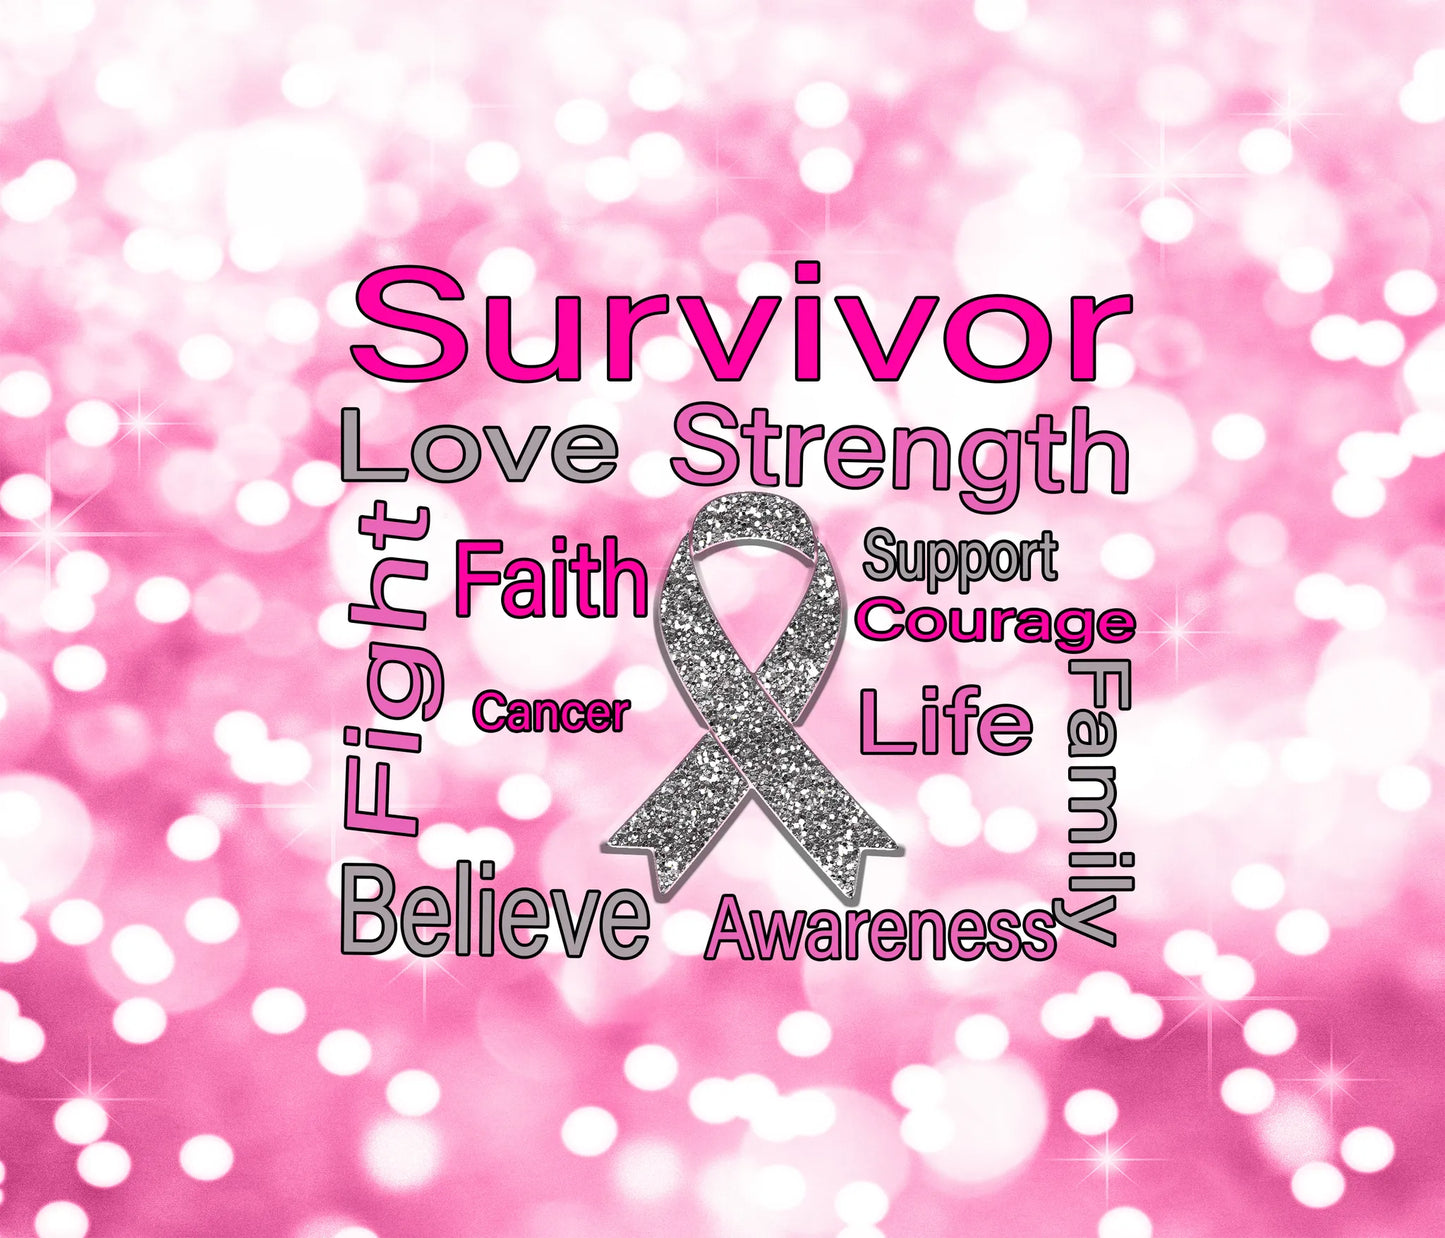 Breast Cancer Awareness - Qualities of a Survivor - Silver Ribbon w/ Sparkly Pink & White Background - 20 Oz Sublimation Transfer